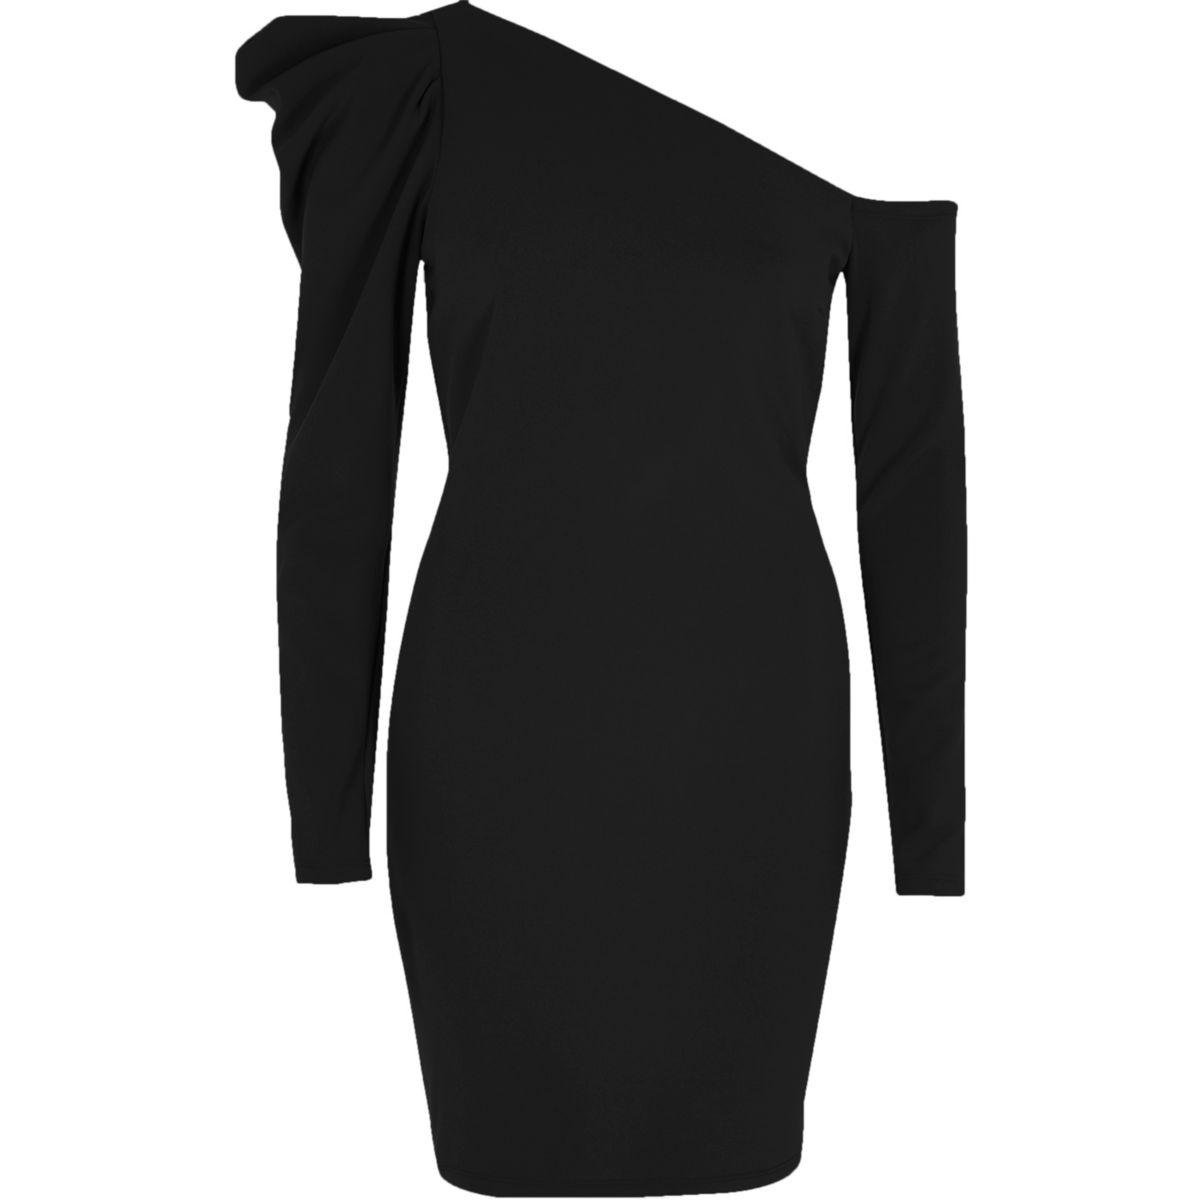 Shaped dress one cape island river shoulder bodycon for